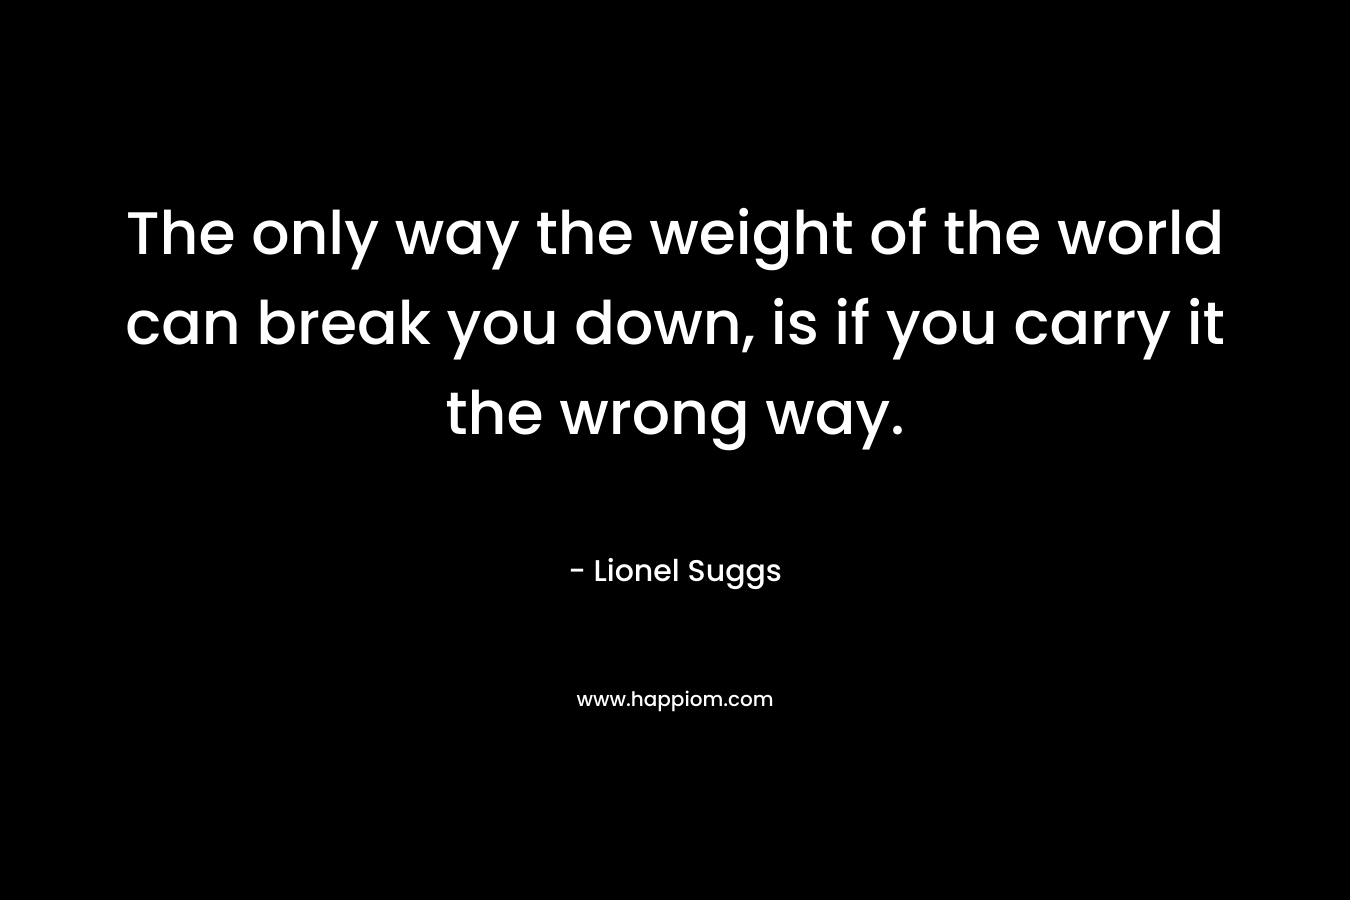 The only way the weight of the world can break you down, is if you carry it the wrong way.